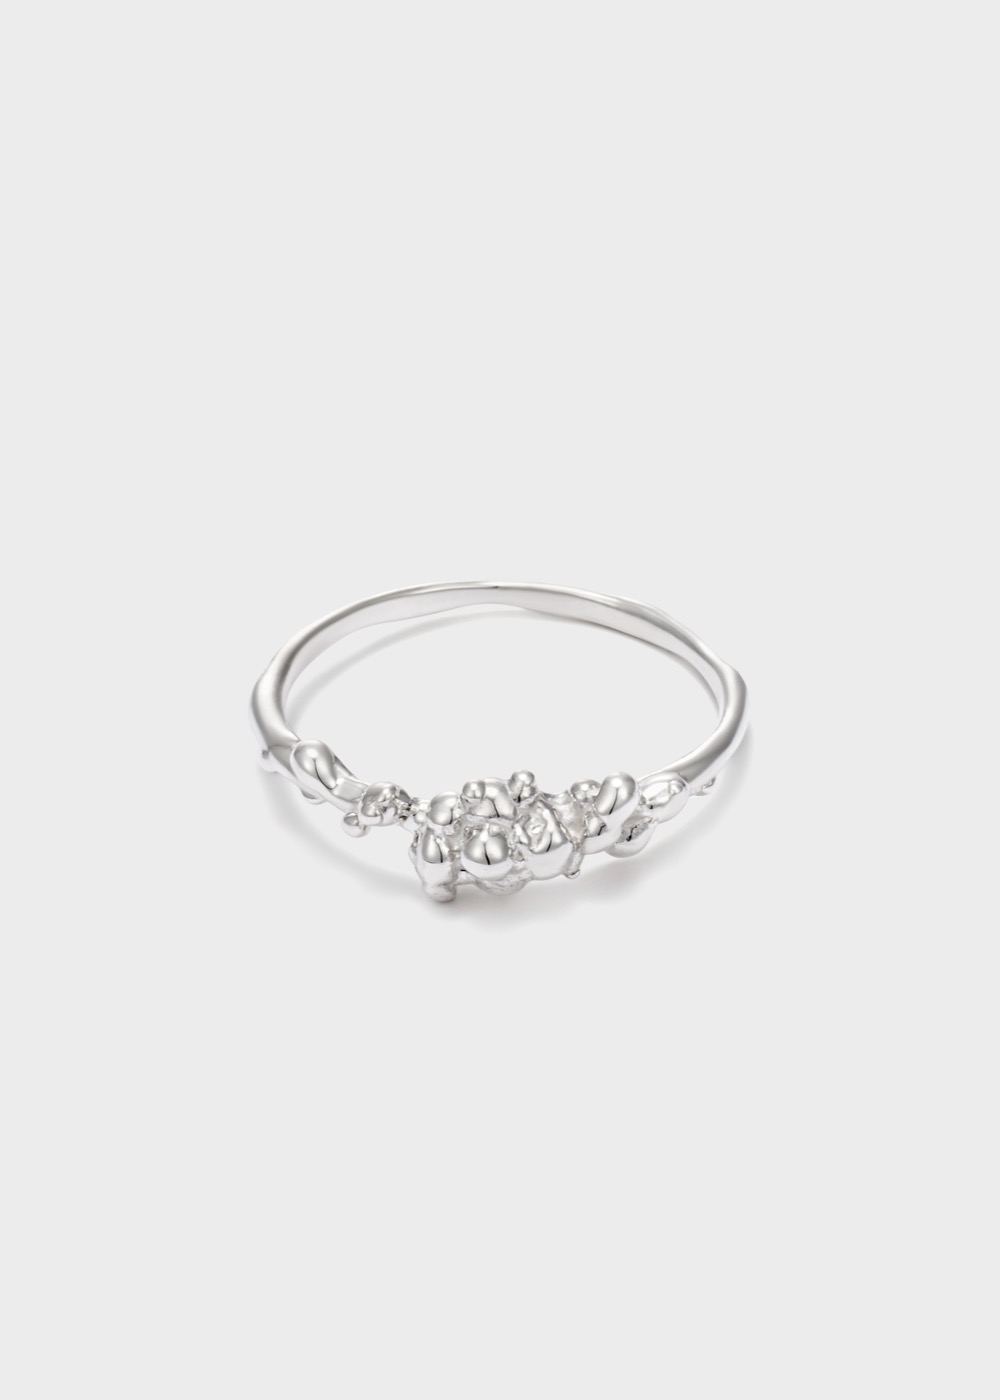 BLOOMED TWIG RING I